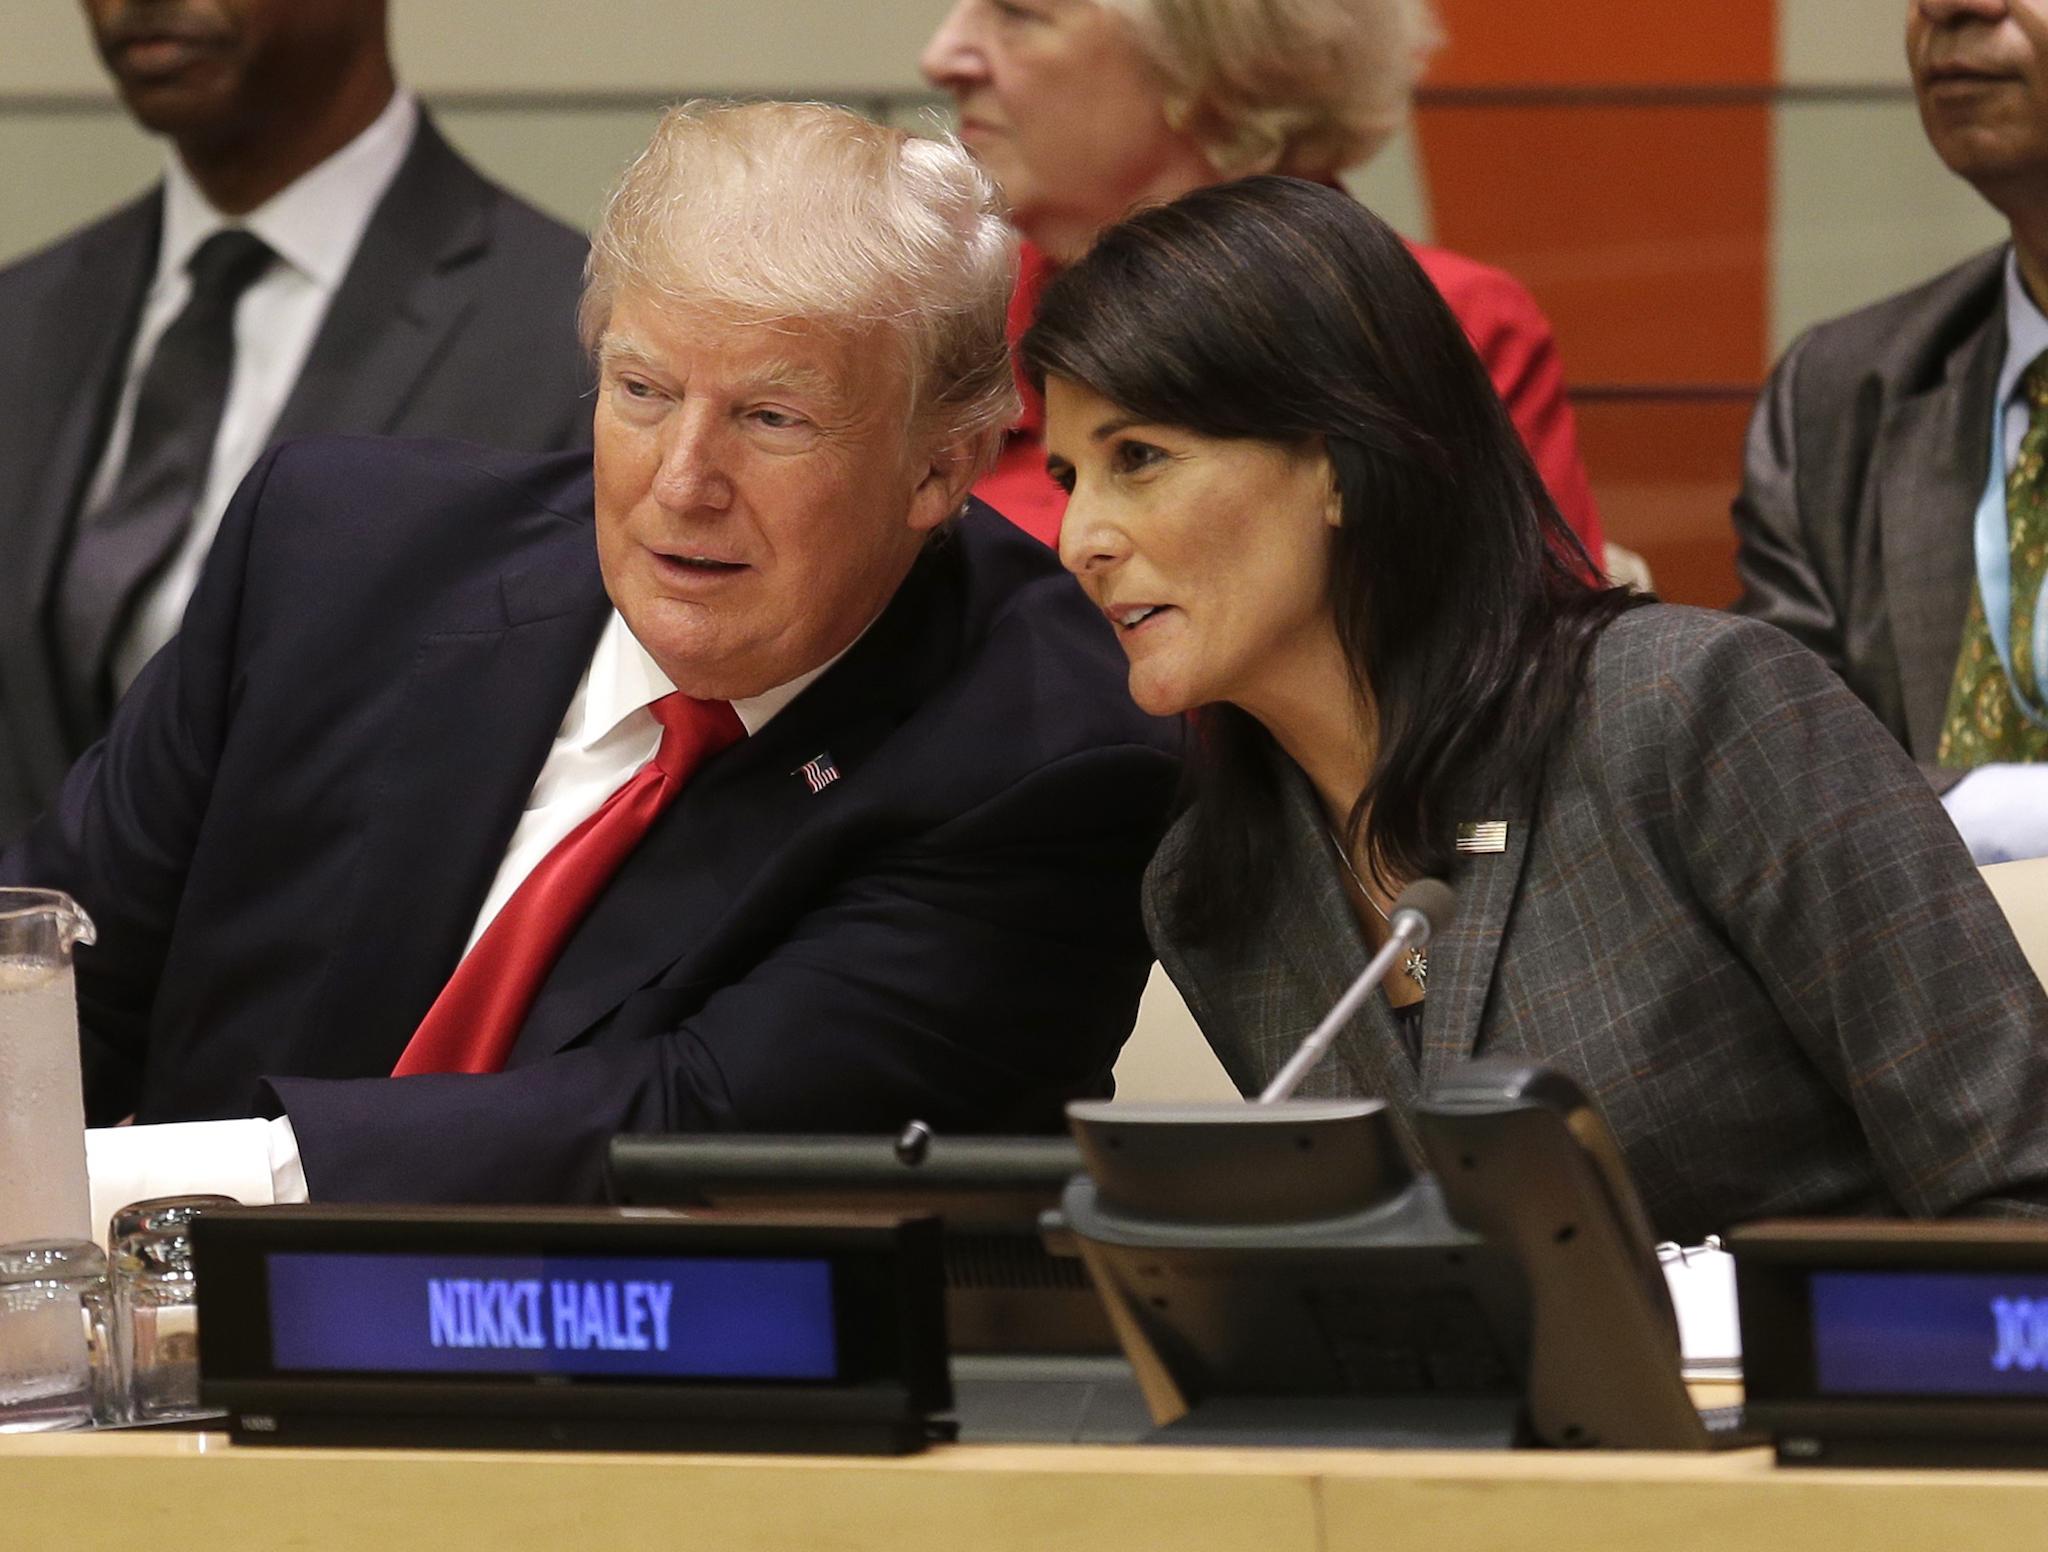 US President Donald Trump speaks with US Ambassador to the United Nations Nikki Haley